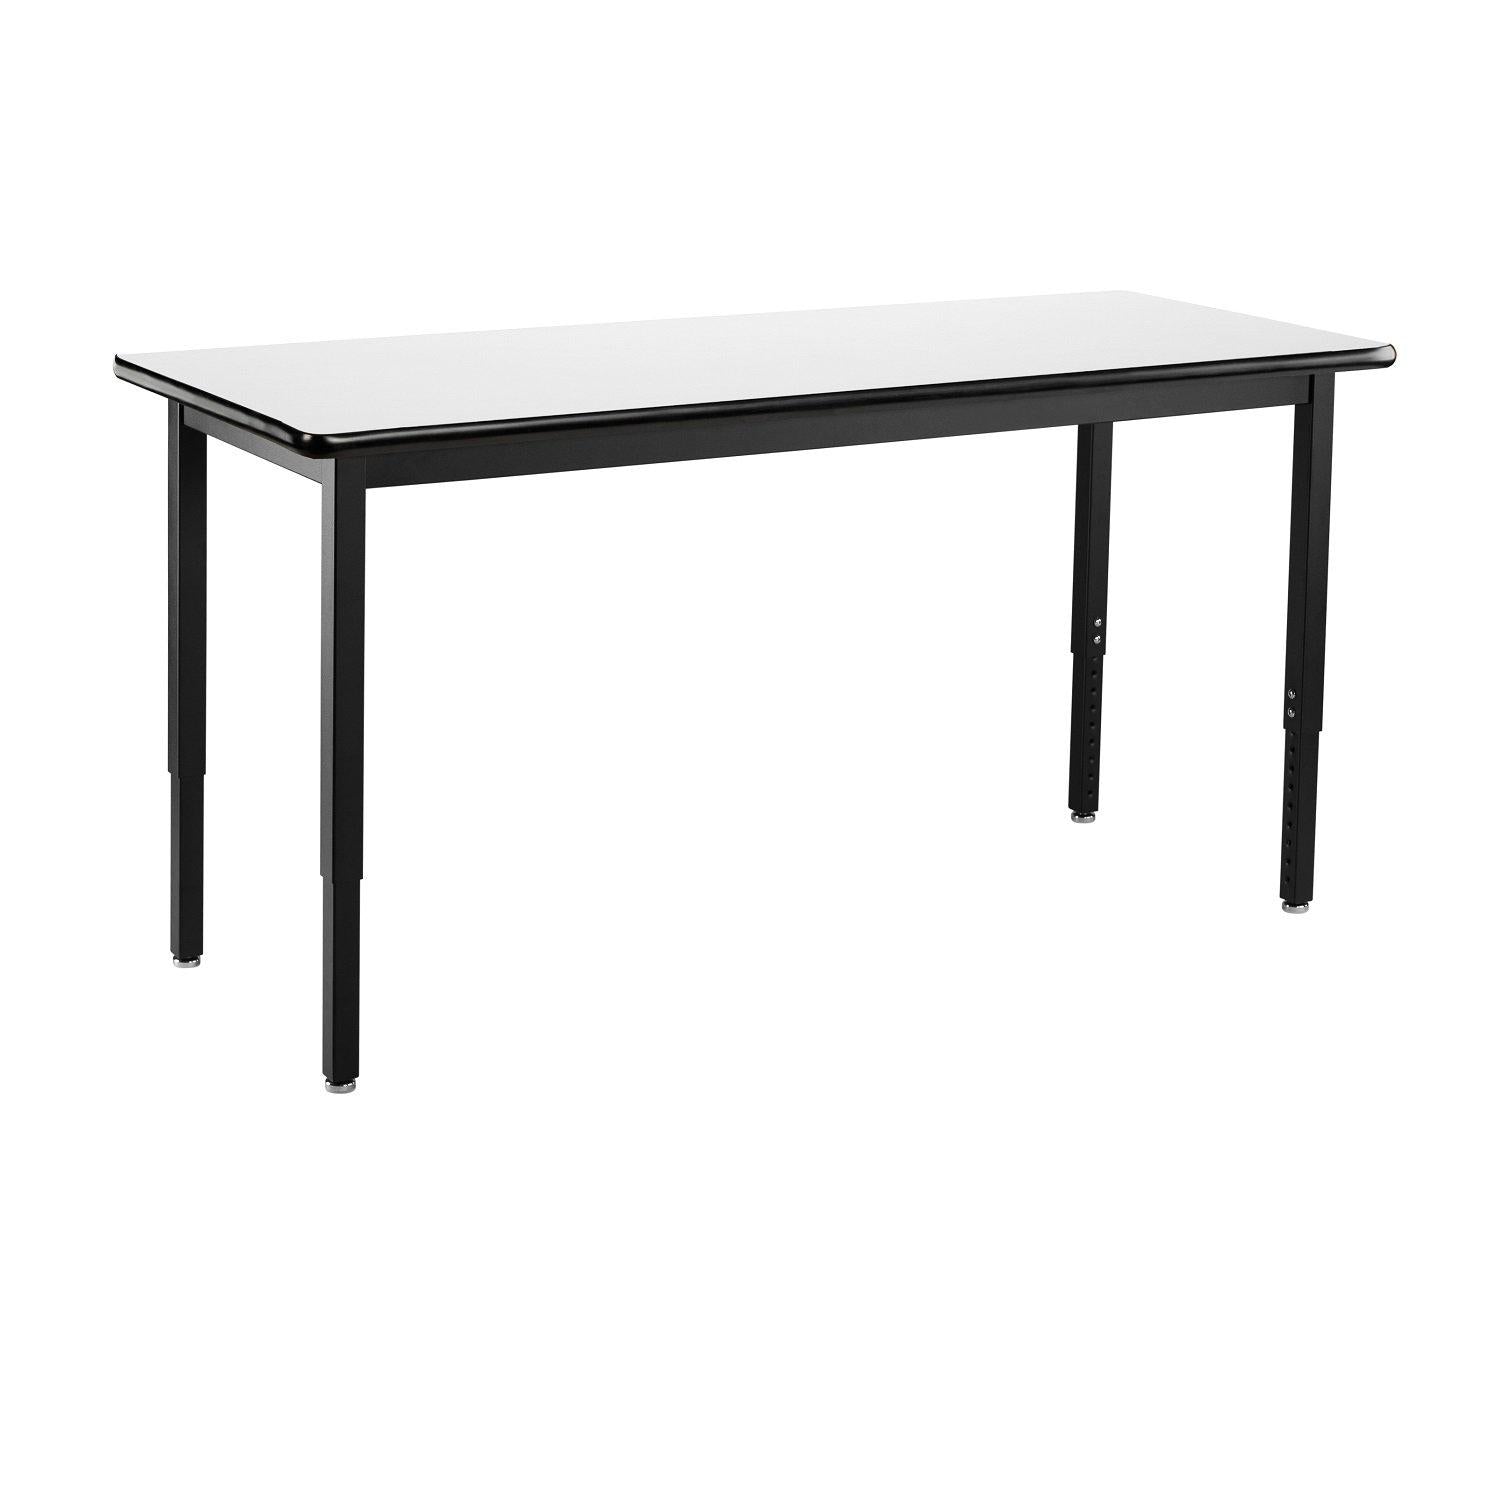 Heavy-Duty Height-Adjustable Utility Table, Black Frame, 24" x 42", Whiteboard High-Pressure Laminate Top